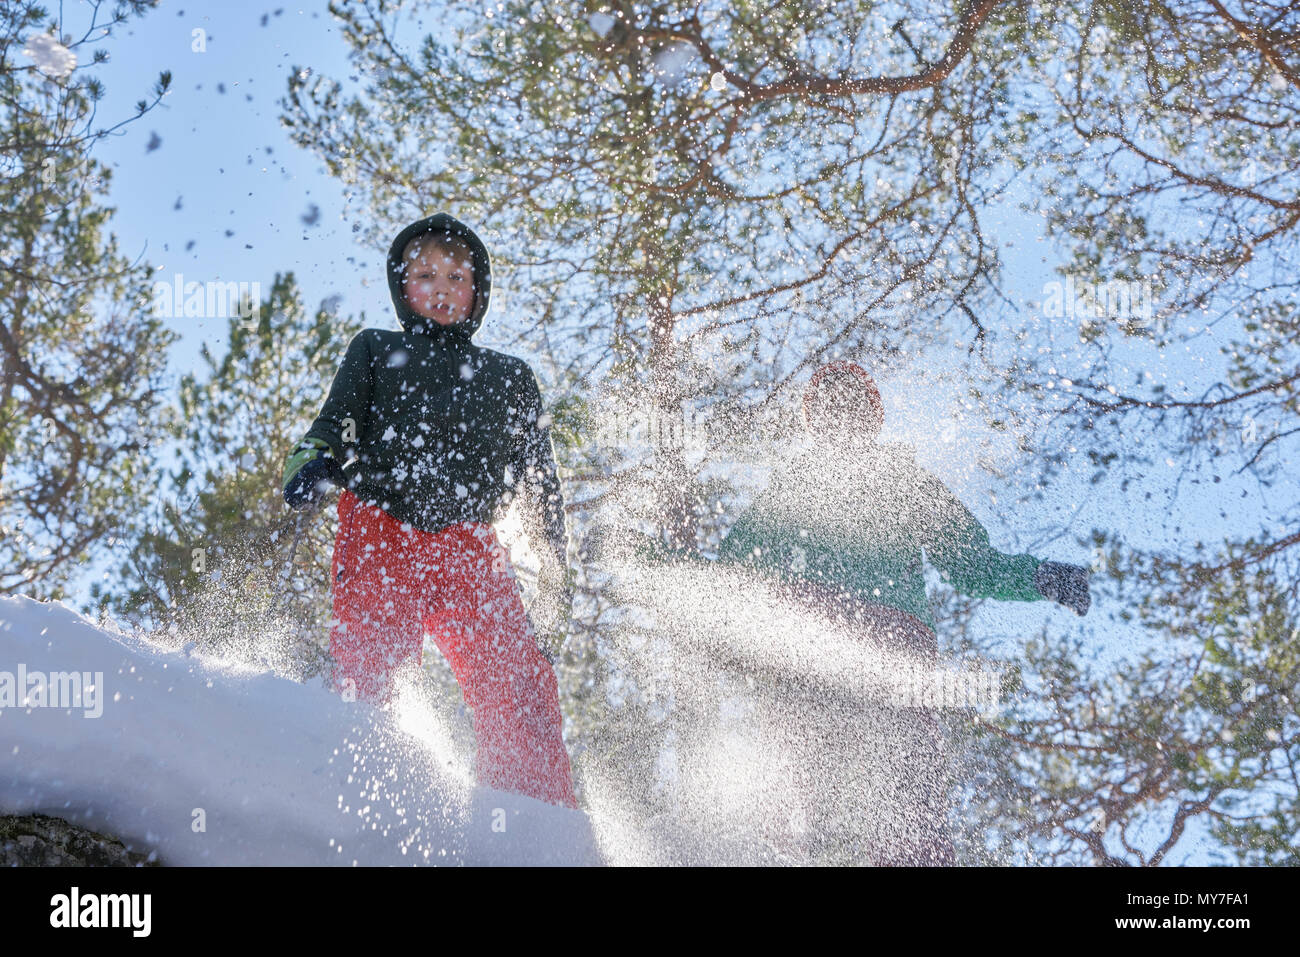 Two boys jumping in snow, low angle view Stock Photo